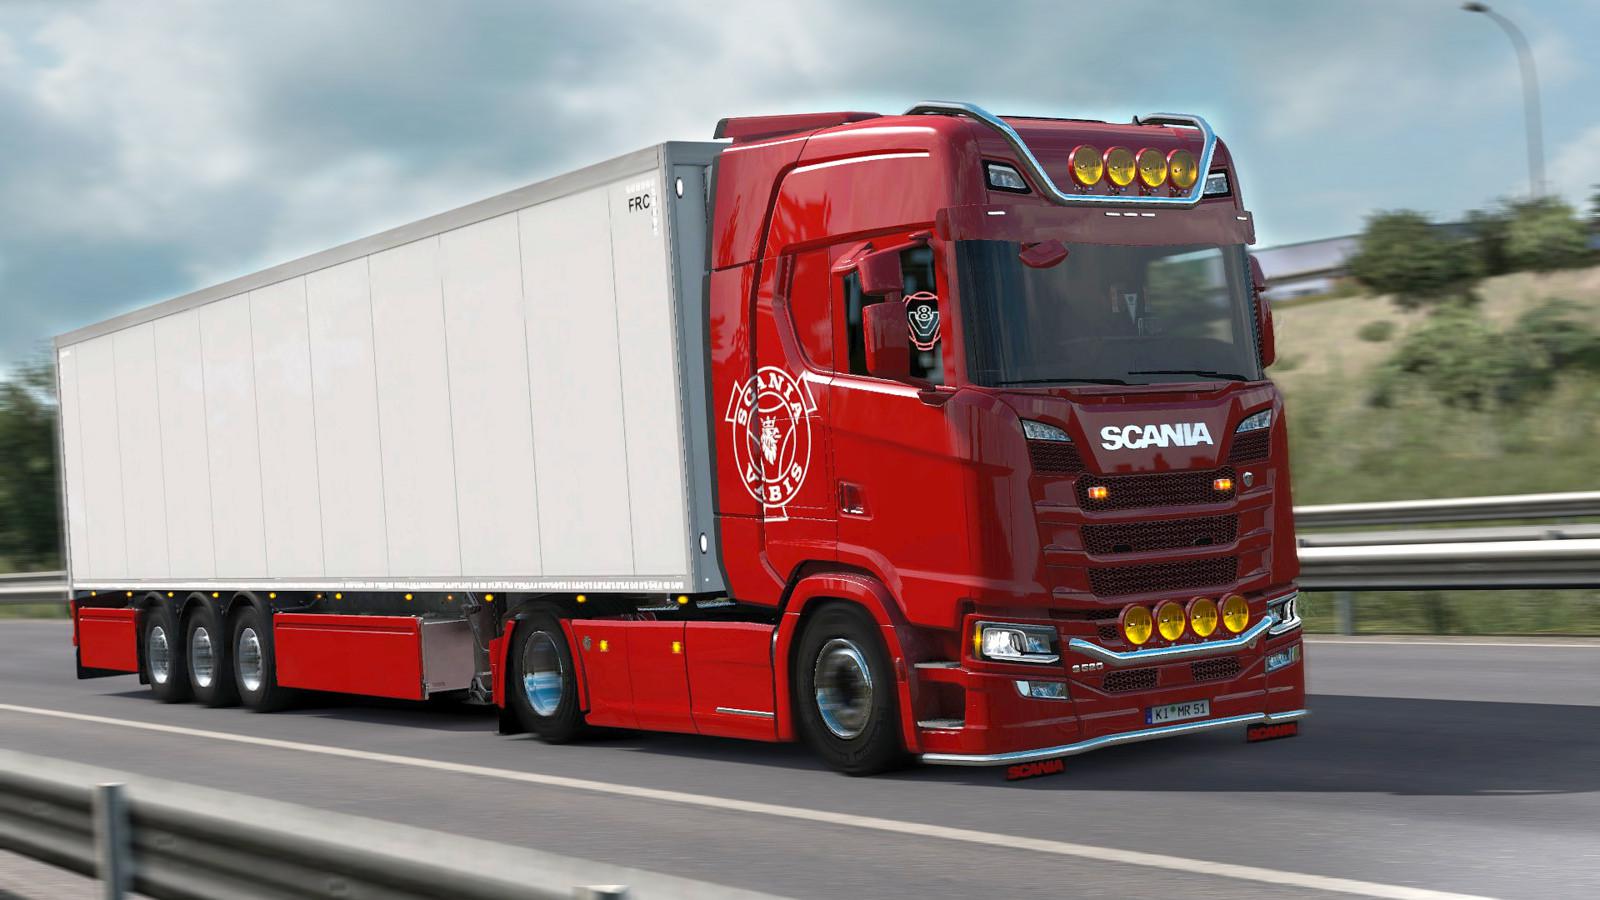 Powerful Engine of 1000 HP for Standard SCS Truck v1.0